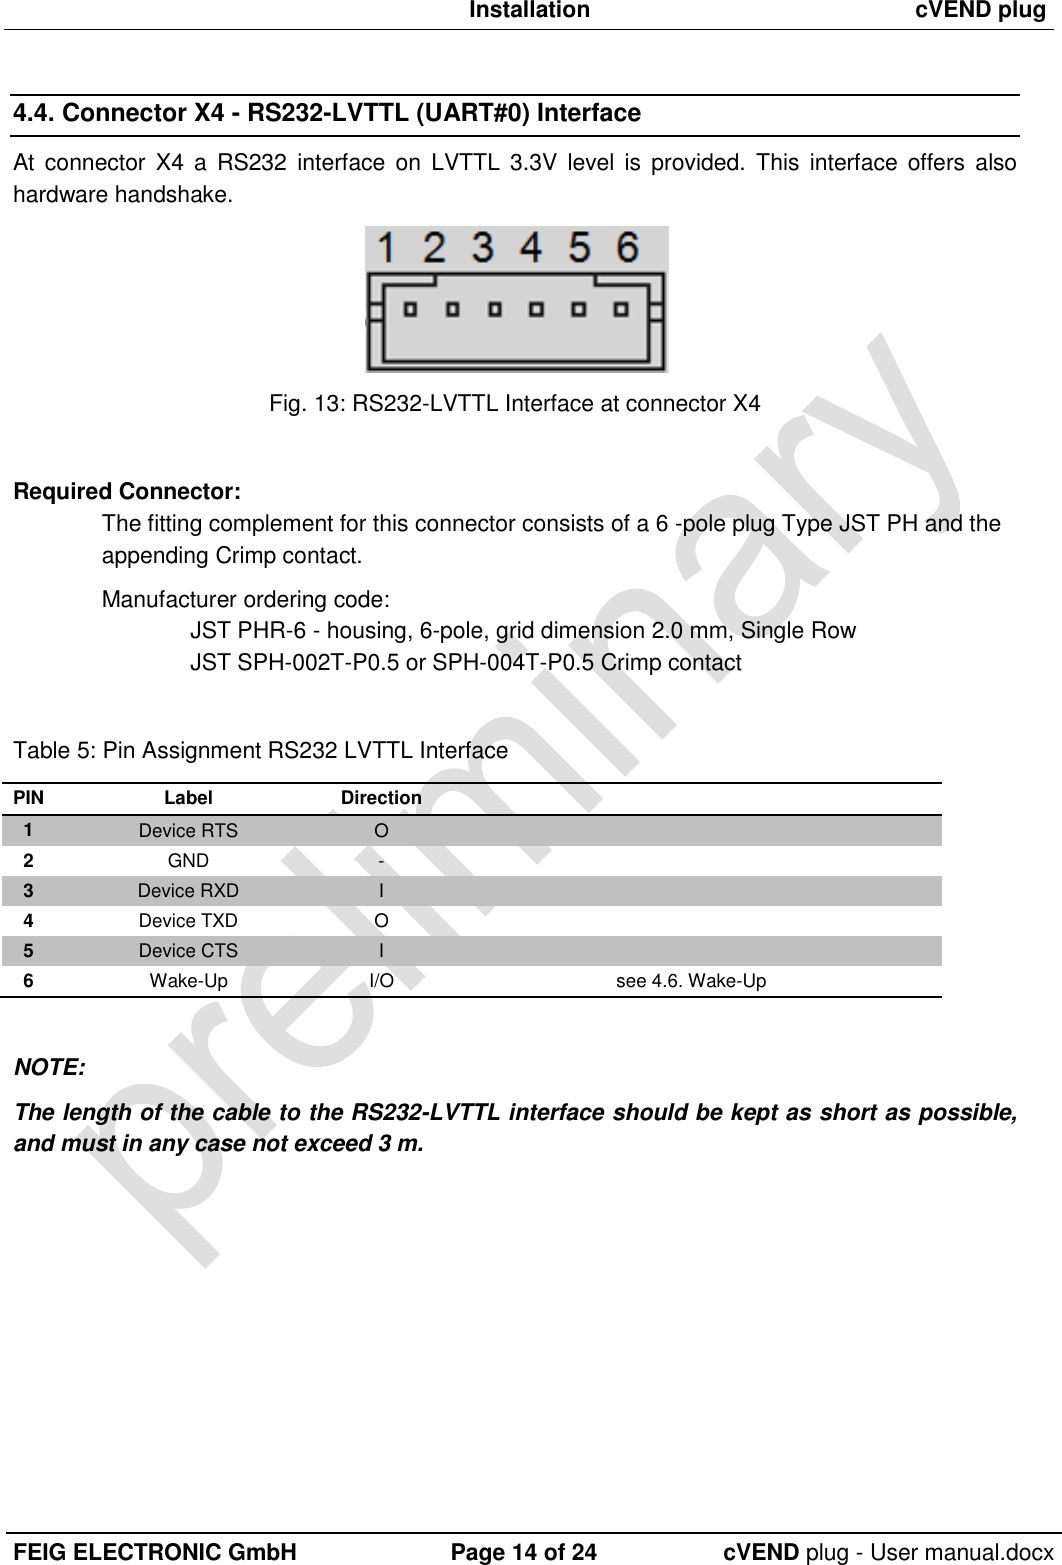  Installation cVEND plug  FEIG ELECTRONIC GmbH Page 14 of 24 cVEND plug - User manual.docx  4.4. Connector X4 - RS232-LVTTL (UART#0) Interface At  connector X4  a  RS232 interface  on  LVTTL  3.3V  level  is  provided.  This  interface offers  also hardware handshake.   Fig. 13: RS232-LVTTL Interface at connector X4  Required Connector: The fitting complement for this connector consists of a 6 -pole plug Type JST PH and the appending Crimp contact.  Manufacturer ordering code: JST PHR-6 - housing, 6-pole, grid dimension 2.0 mm, Single Row JST SPH-002T-P0.5 or SPH-004T-P0.5 Crimp contact  Table 5: Pin Assignment RS232 LVTTL Interface PIN Label Direction  1 Device RTS O  2 GND -  3 Device RXD I  4 Device TXD O  5 Device CTS I  6 Wake-Up I/O see 4.6. Wake-Up  NOTE: The length of the cable to the RS232-LVTTL interface should be kept as short as possible, and must in any case not exceed 3 m.  